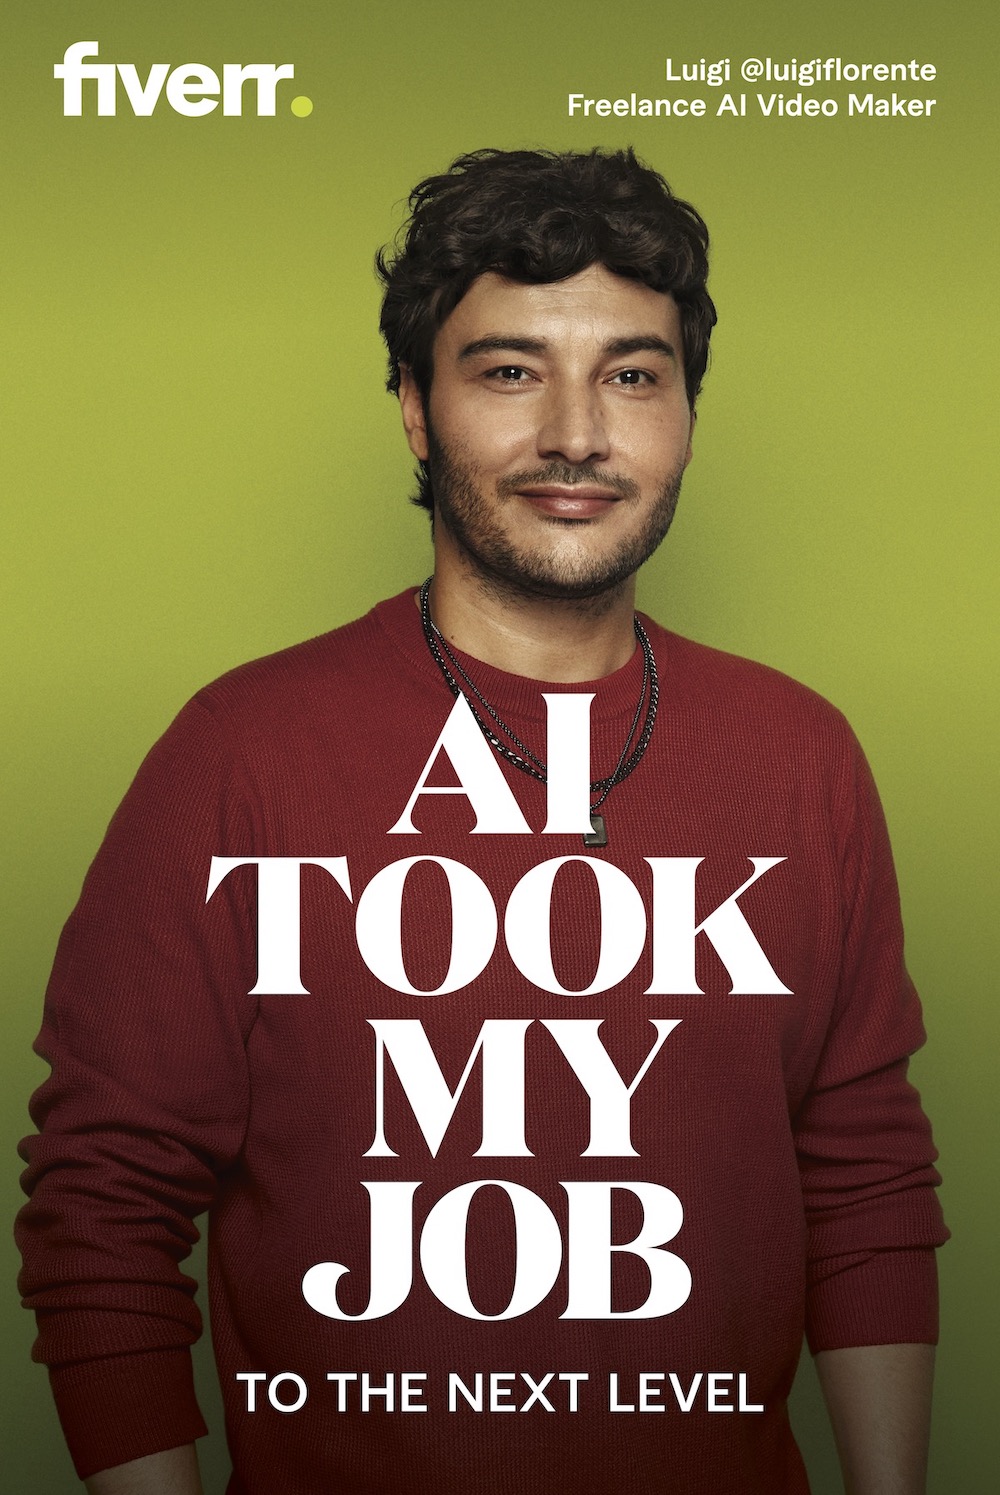 Fiverr Ad Campaign: AI took my job to the next level - Freelance AI Video Maker